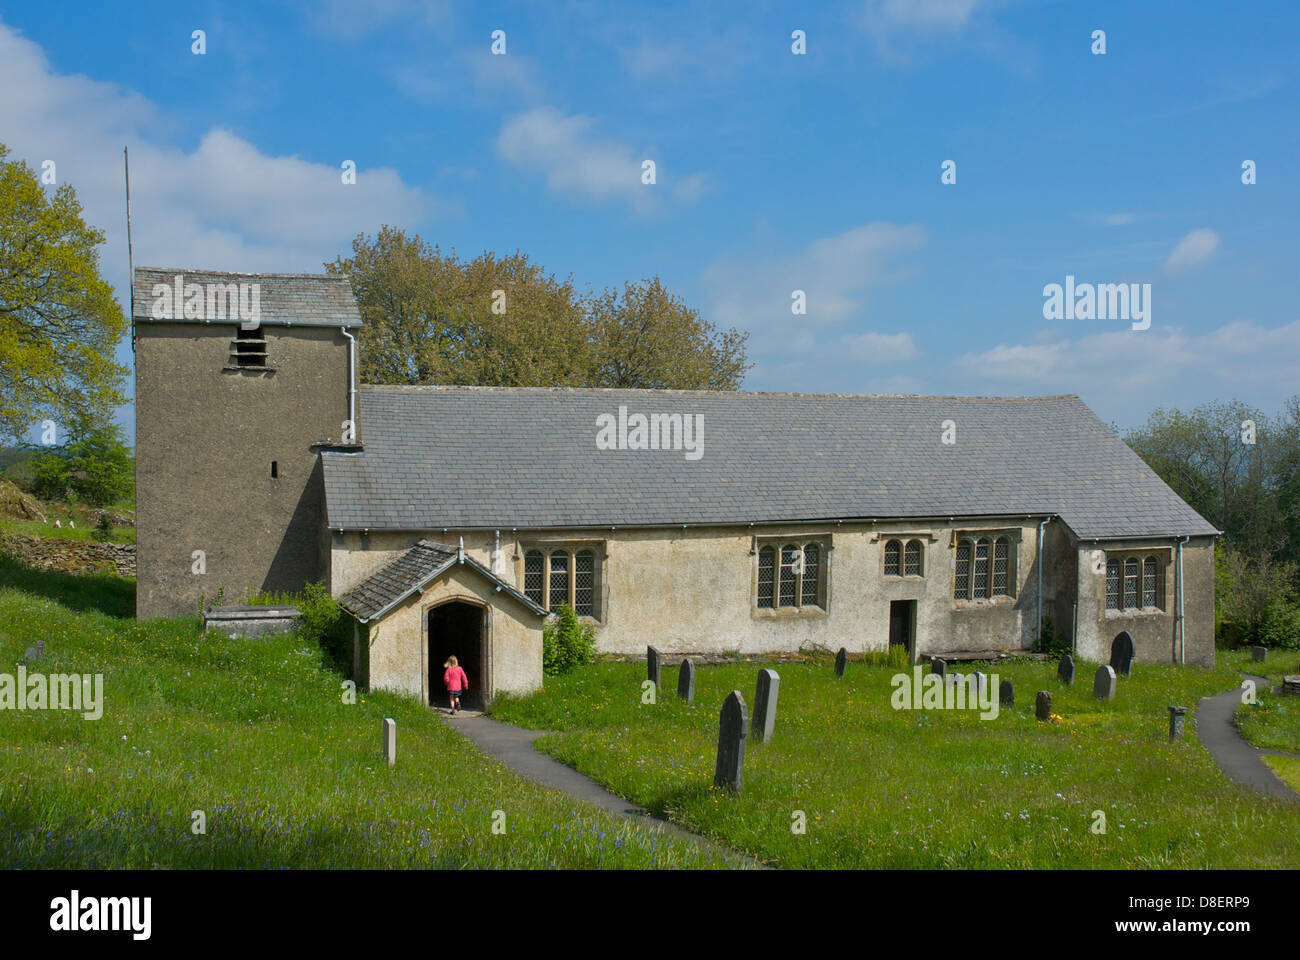 Young girl running inside St Anthony's Church at Cartmel Fell, South Lakeland, Lake District National Park, Cumbria, England UK Stock Photo